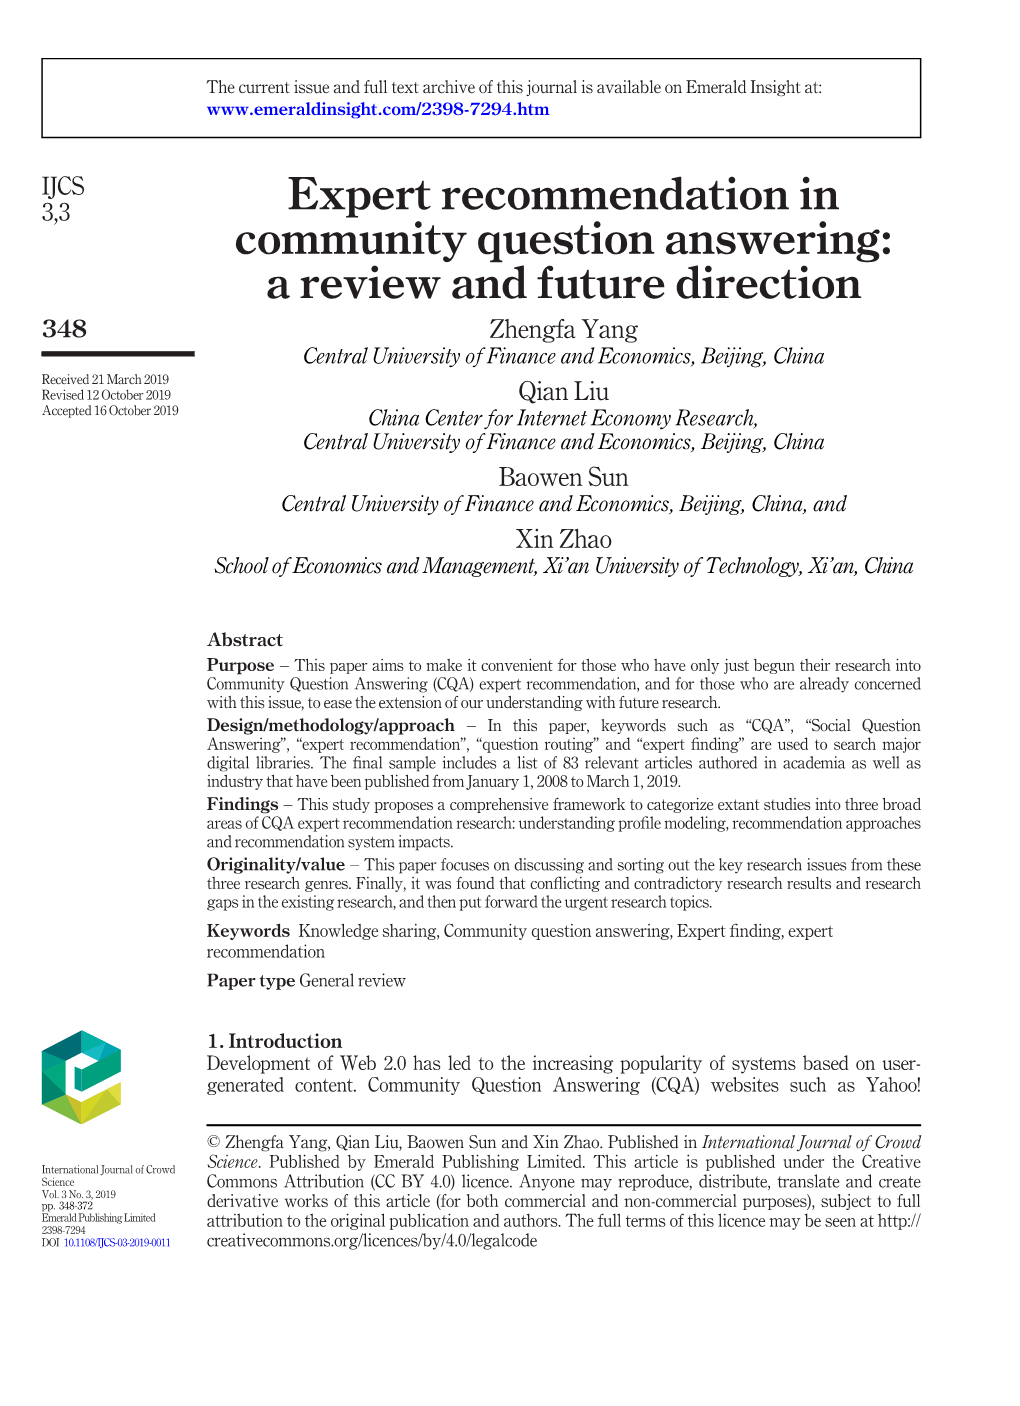 Expert Recommendation in Community Question Answering